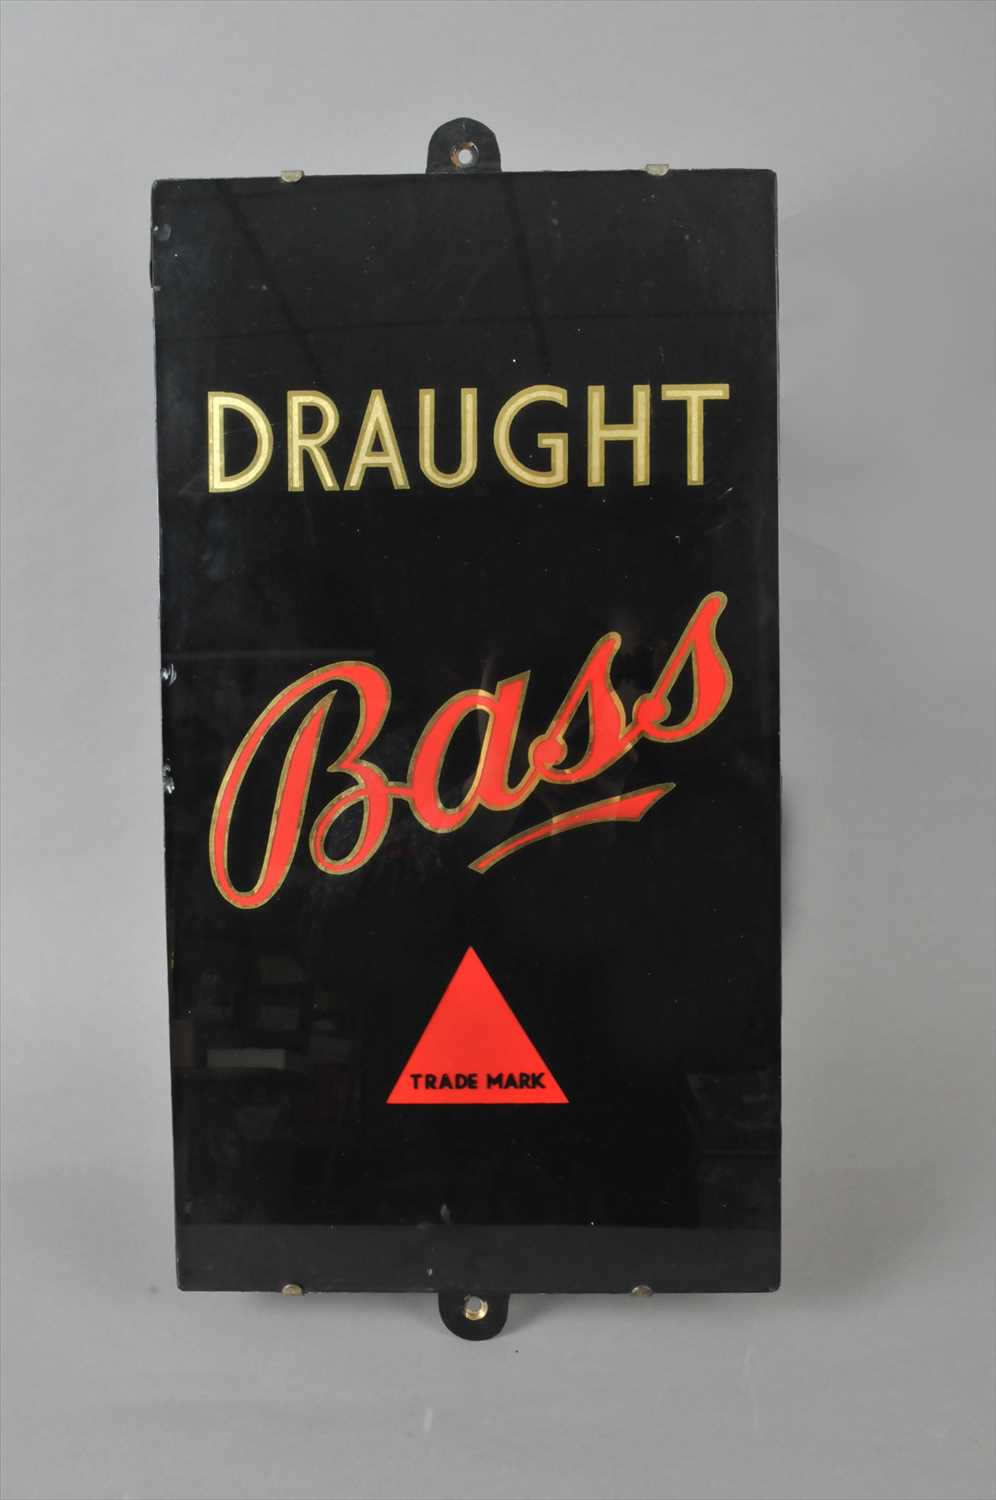 Lot 631 - An original slate-backed pub sign advertising Draught Bass